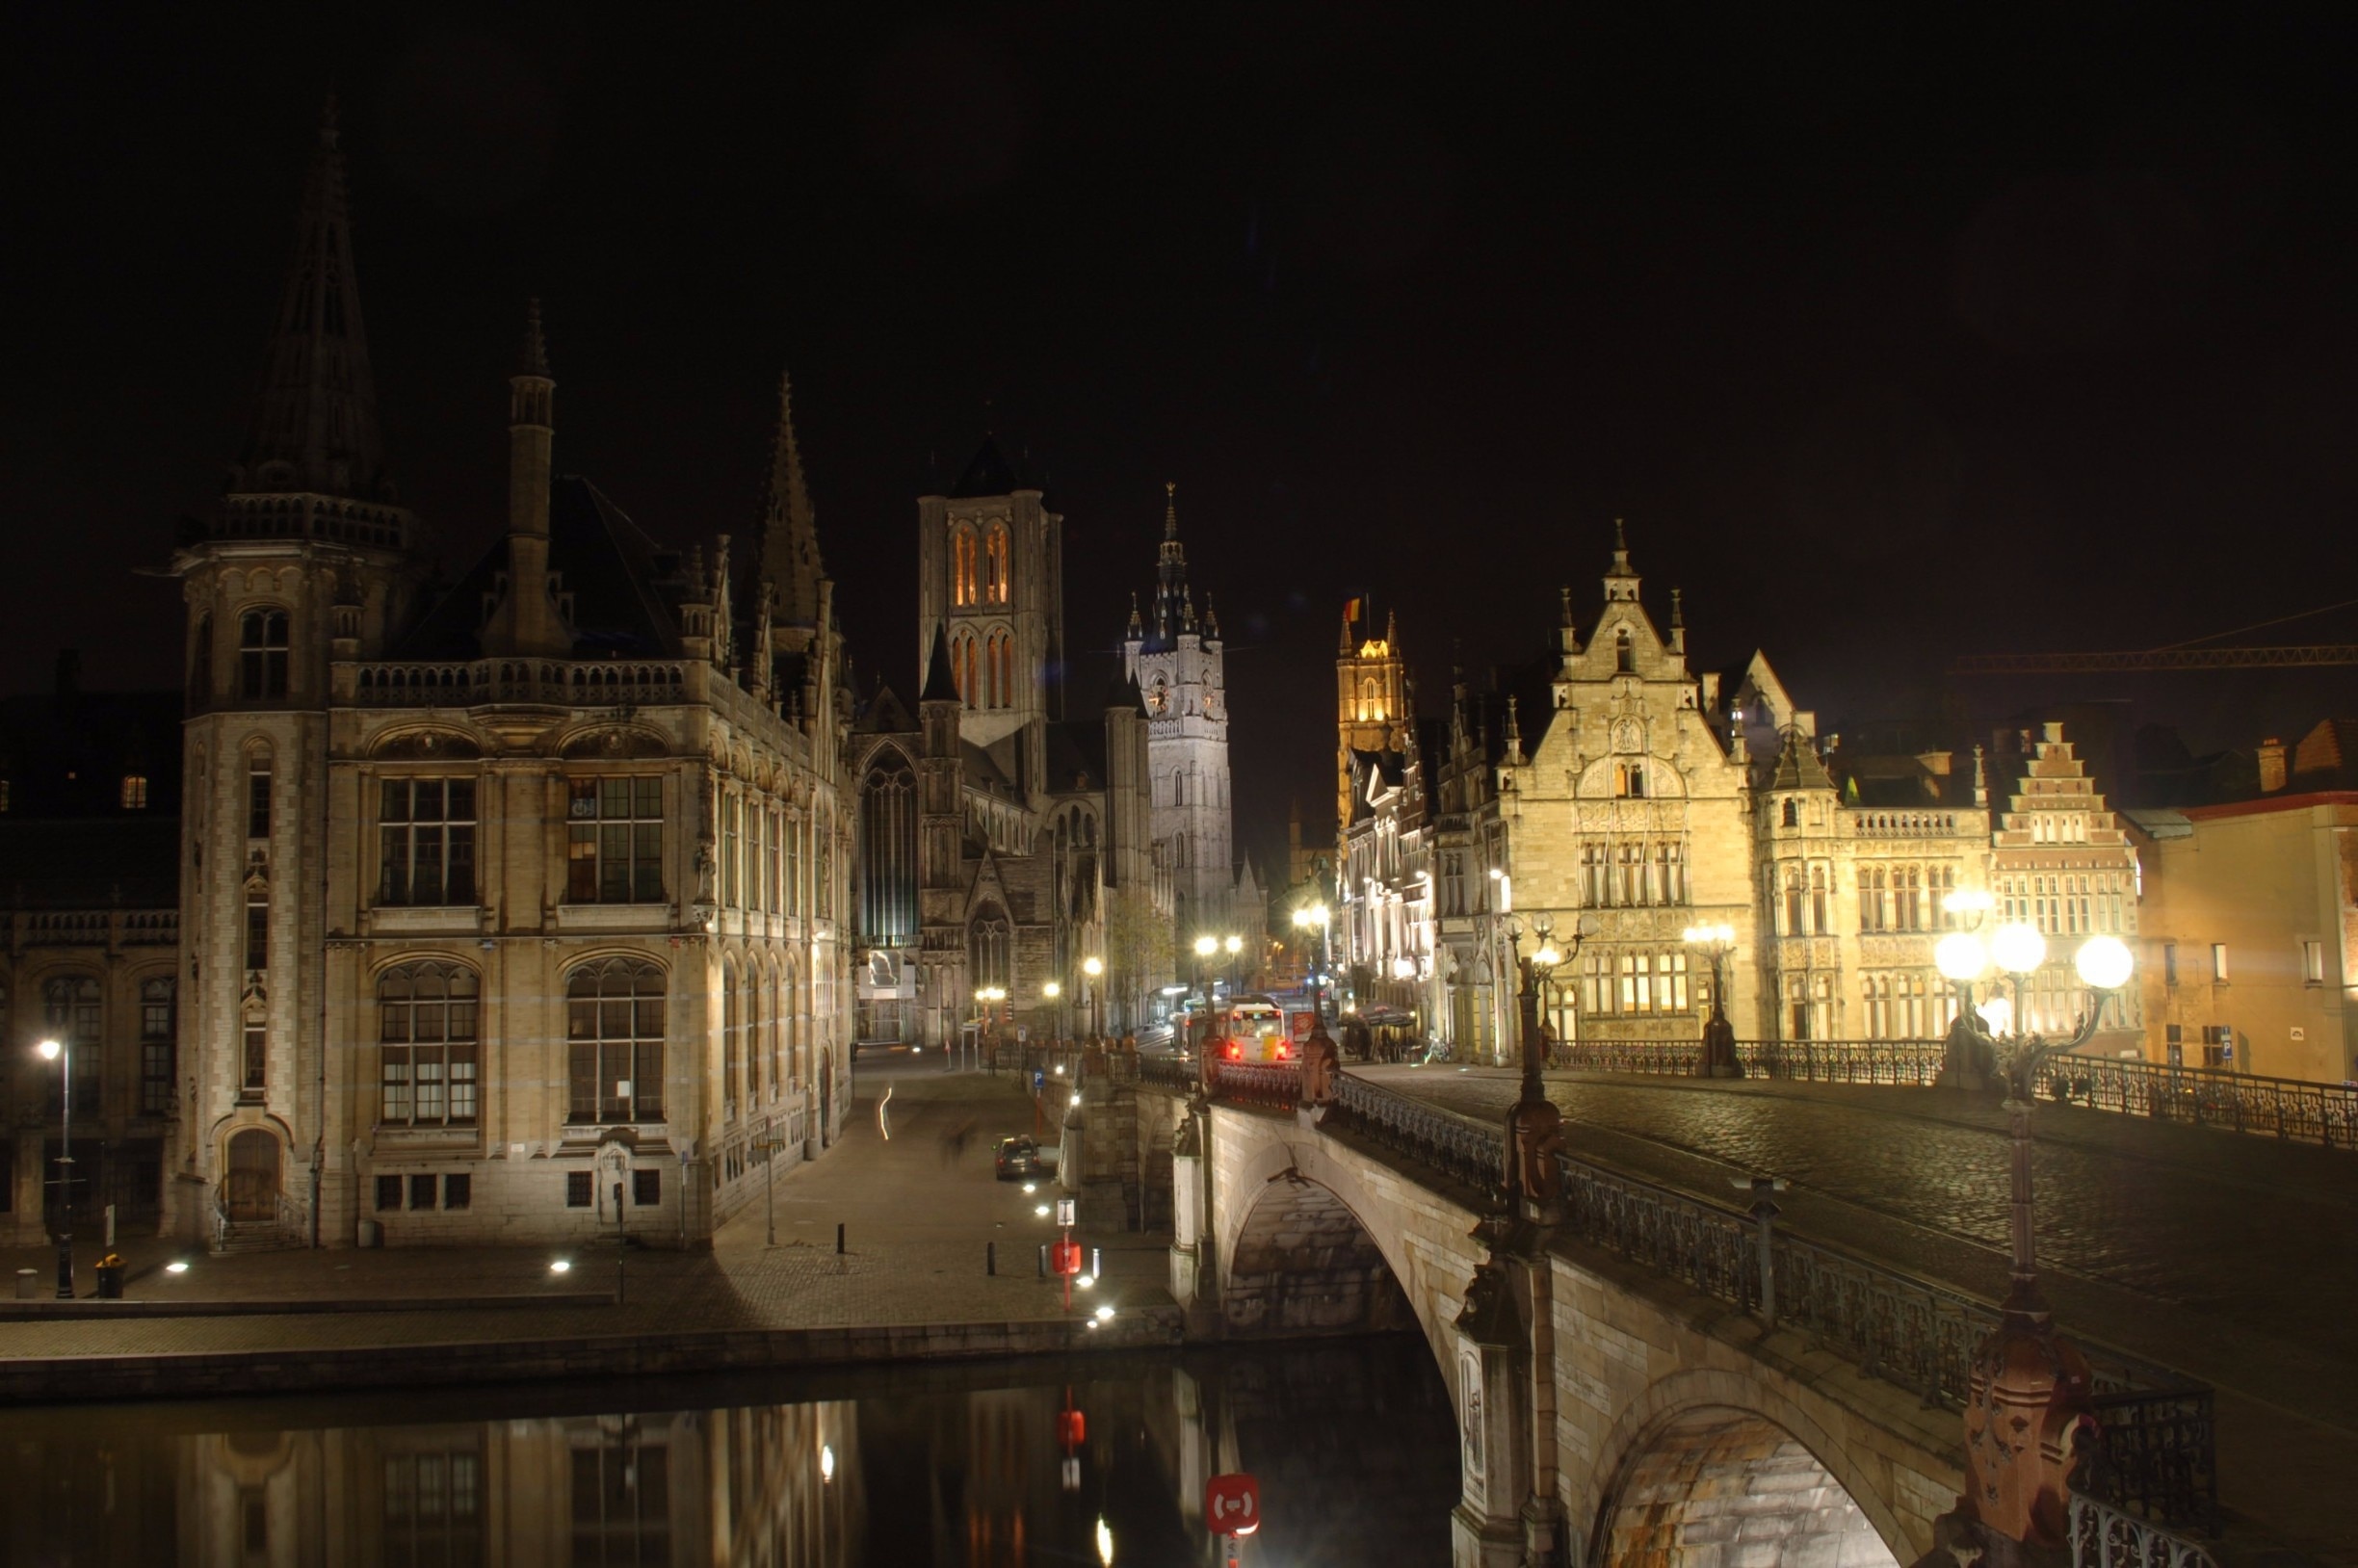 View of St Michael's Bridge and central Ghent from my hostel window.